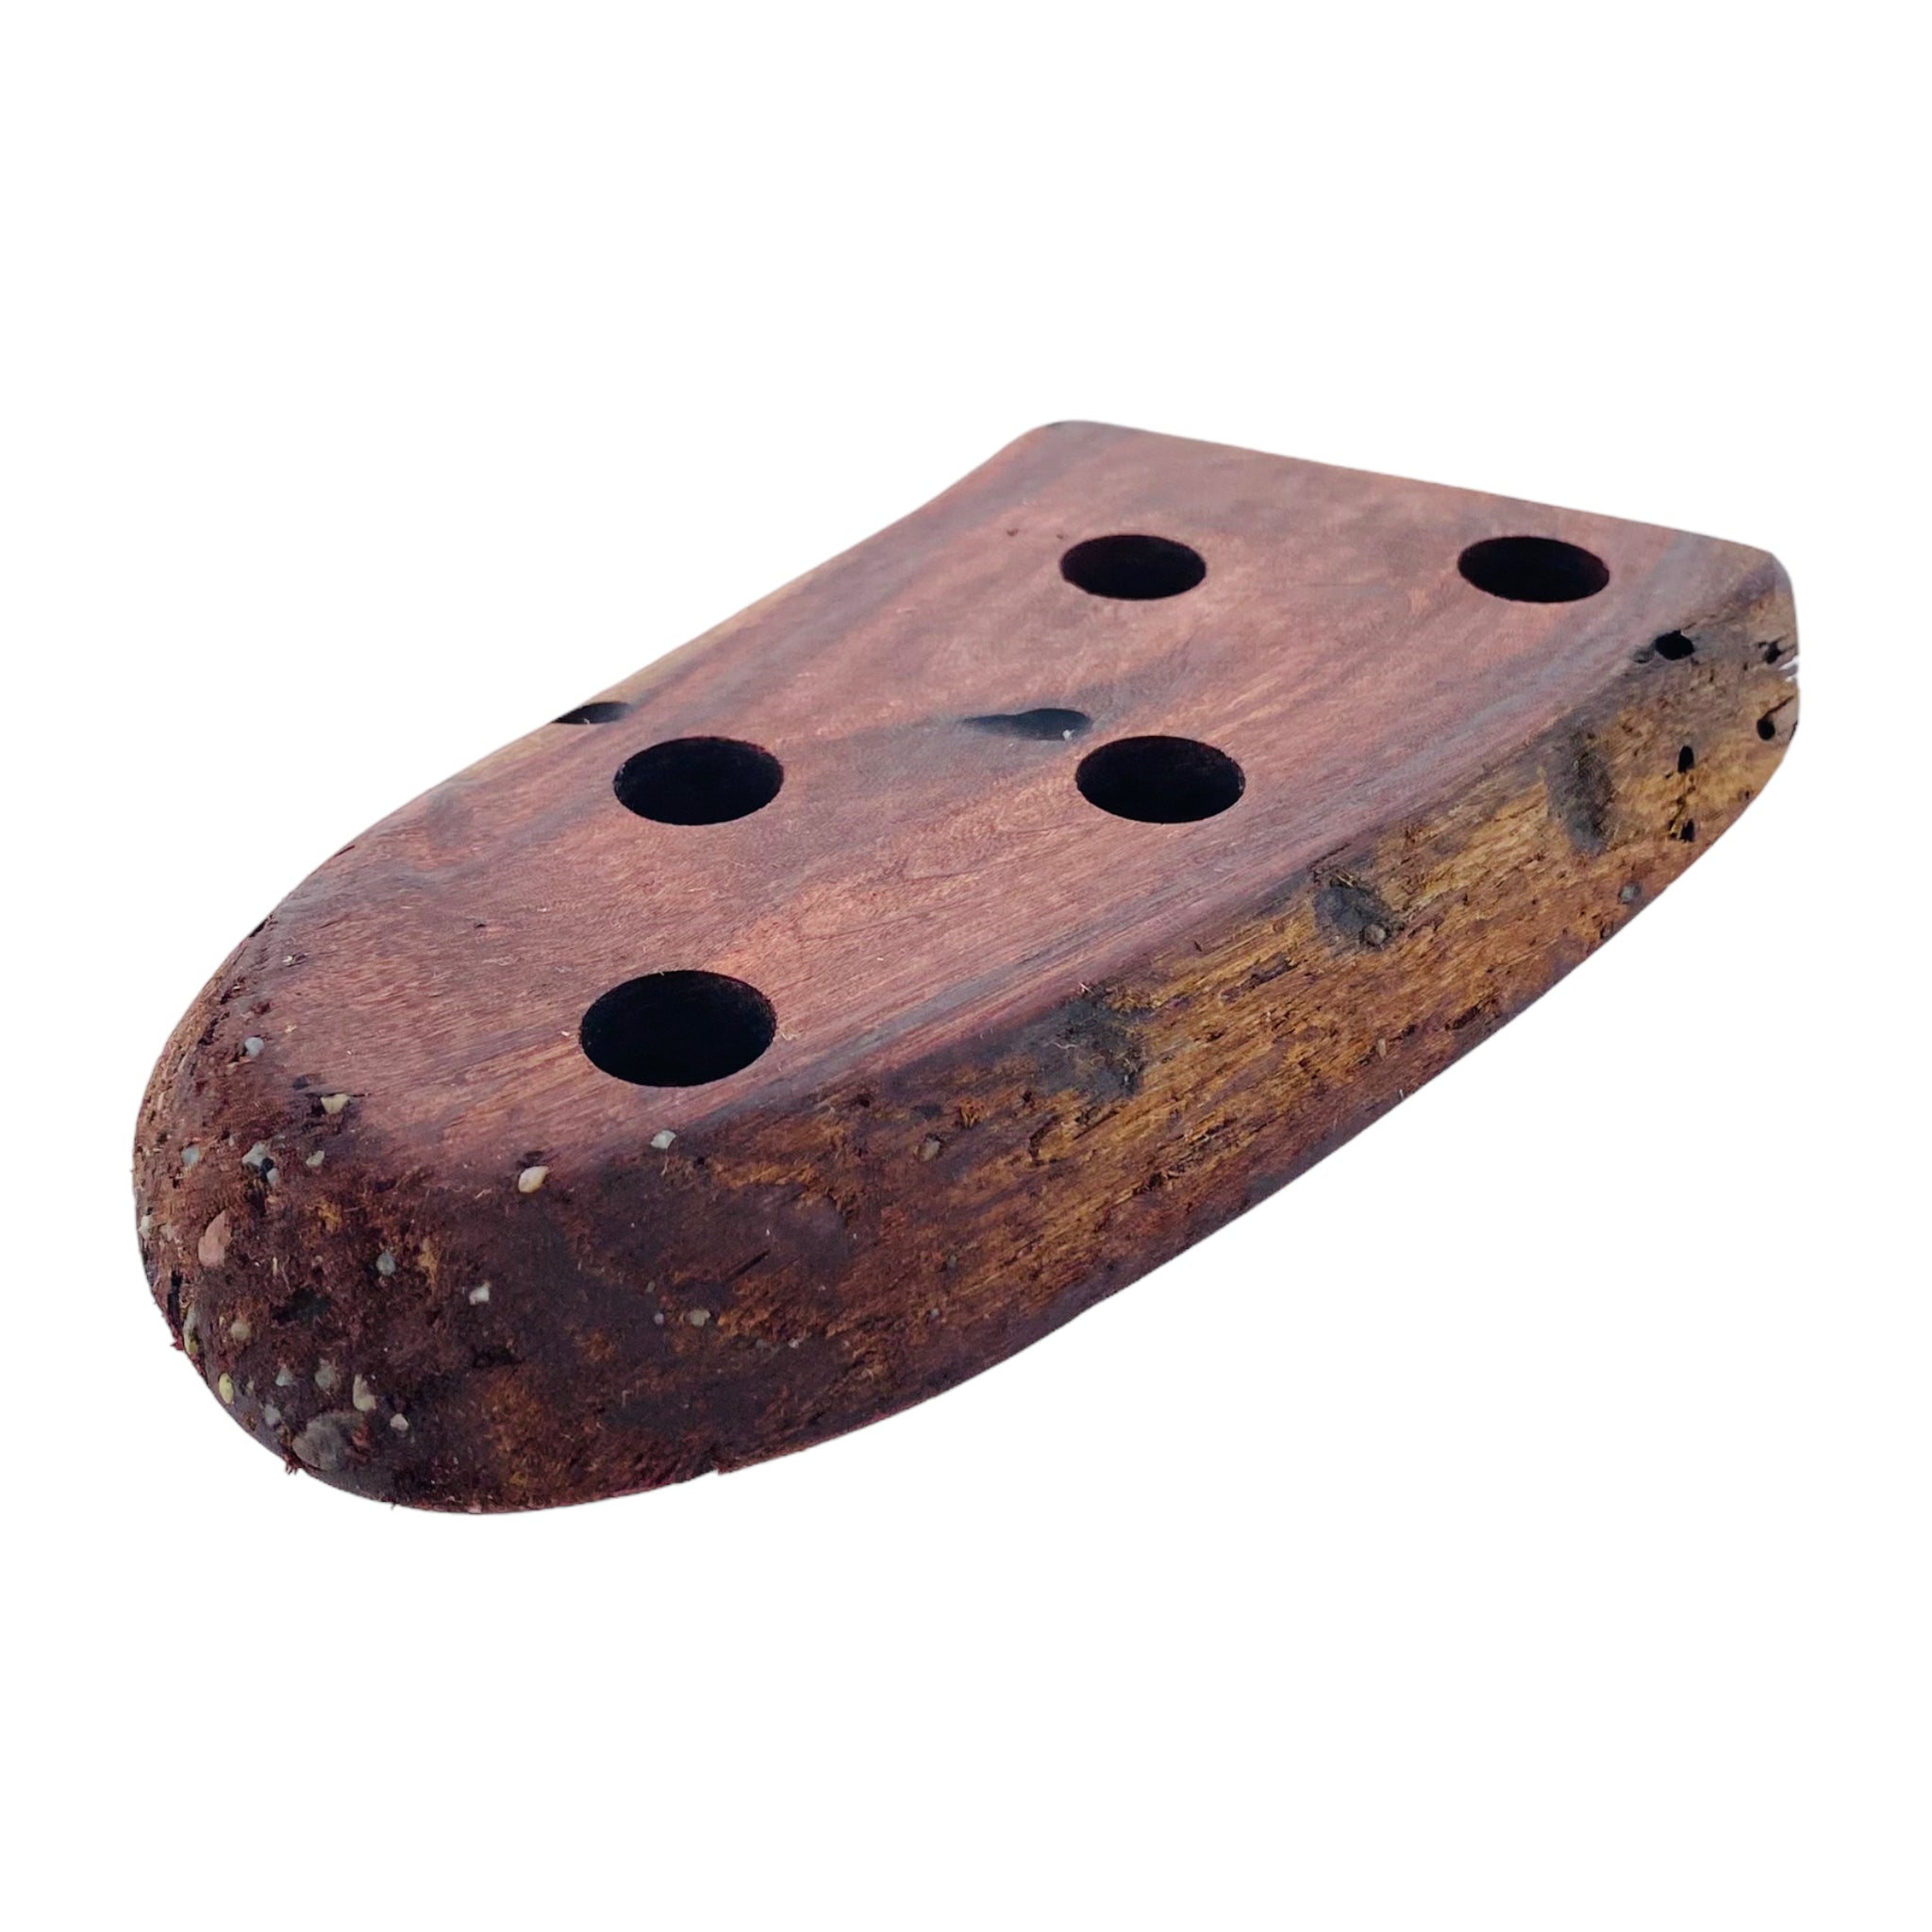 5 Hole Wood Display Stand Holder For 14mm Bong Bowl Pieces Or Quartz Bangers - Red Wood Burl With Live Edge #2